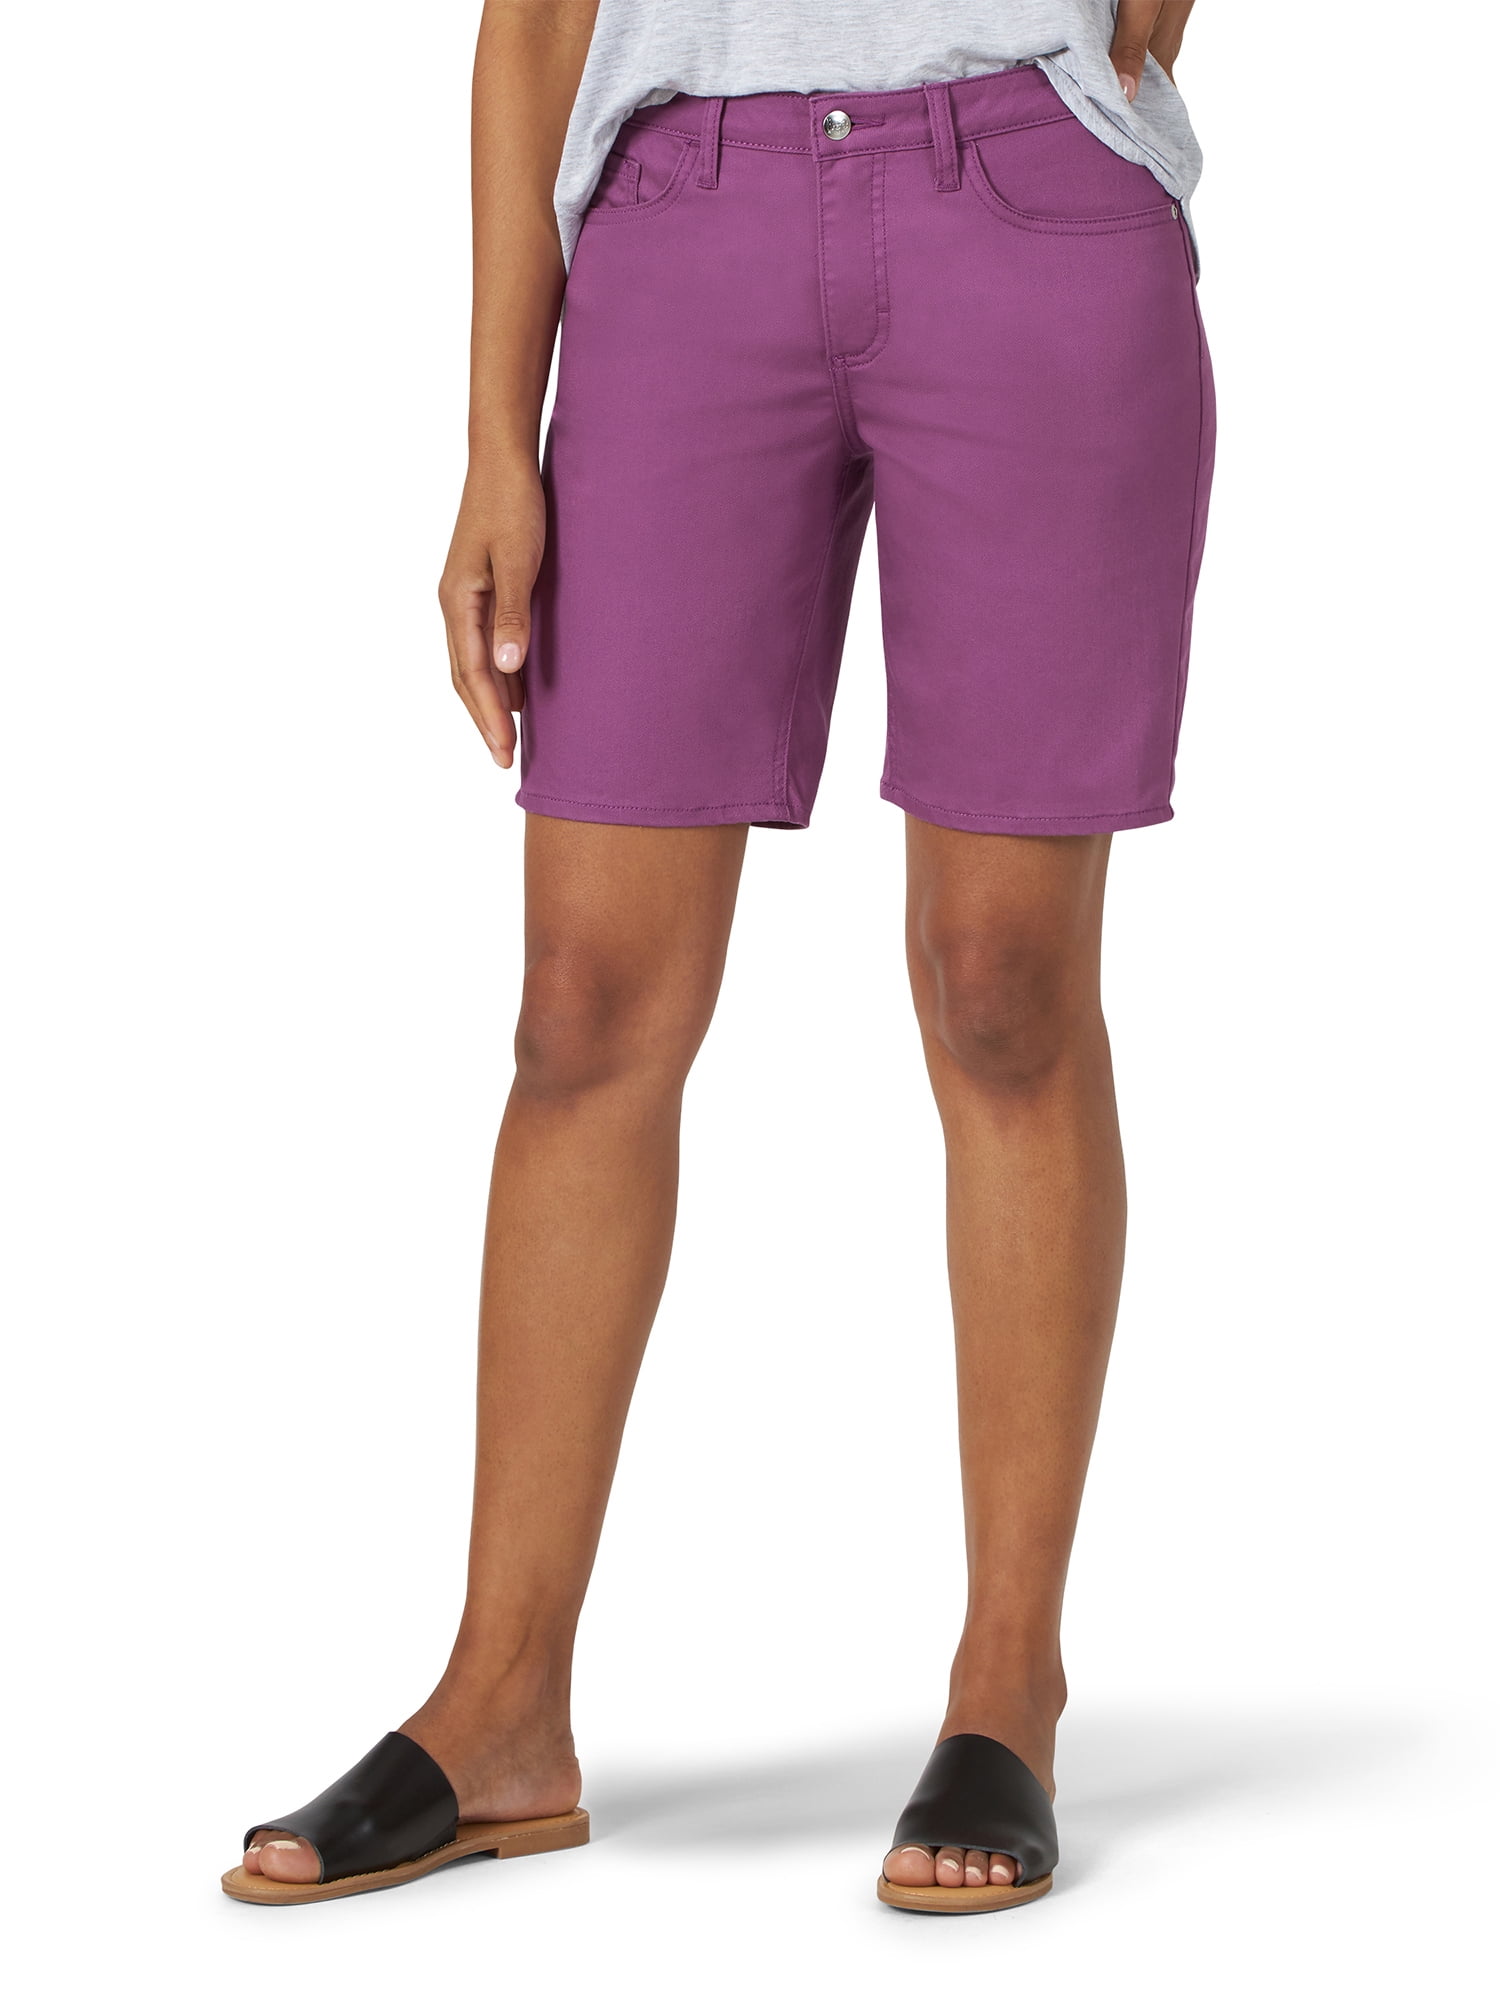 riders by lee mid rise bermuda shorts